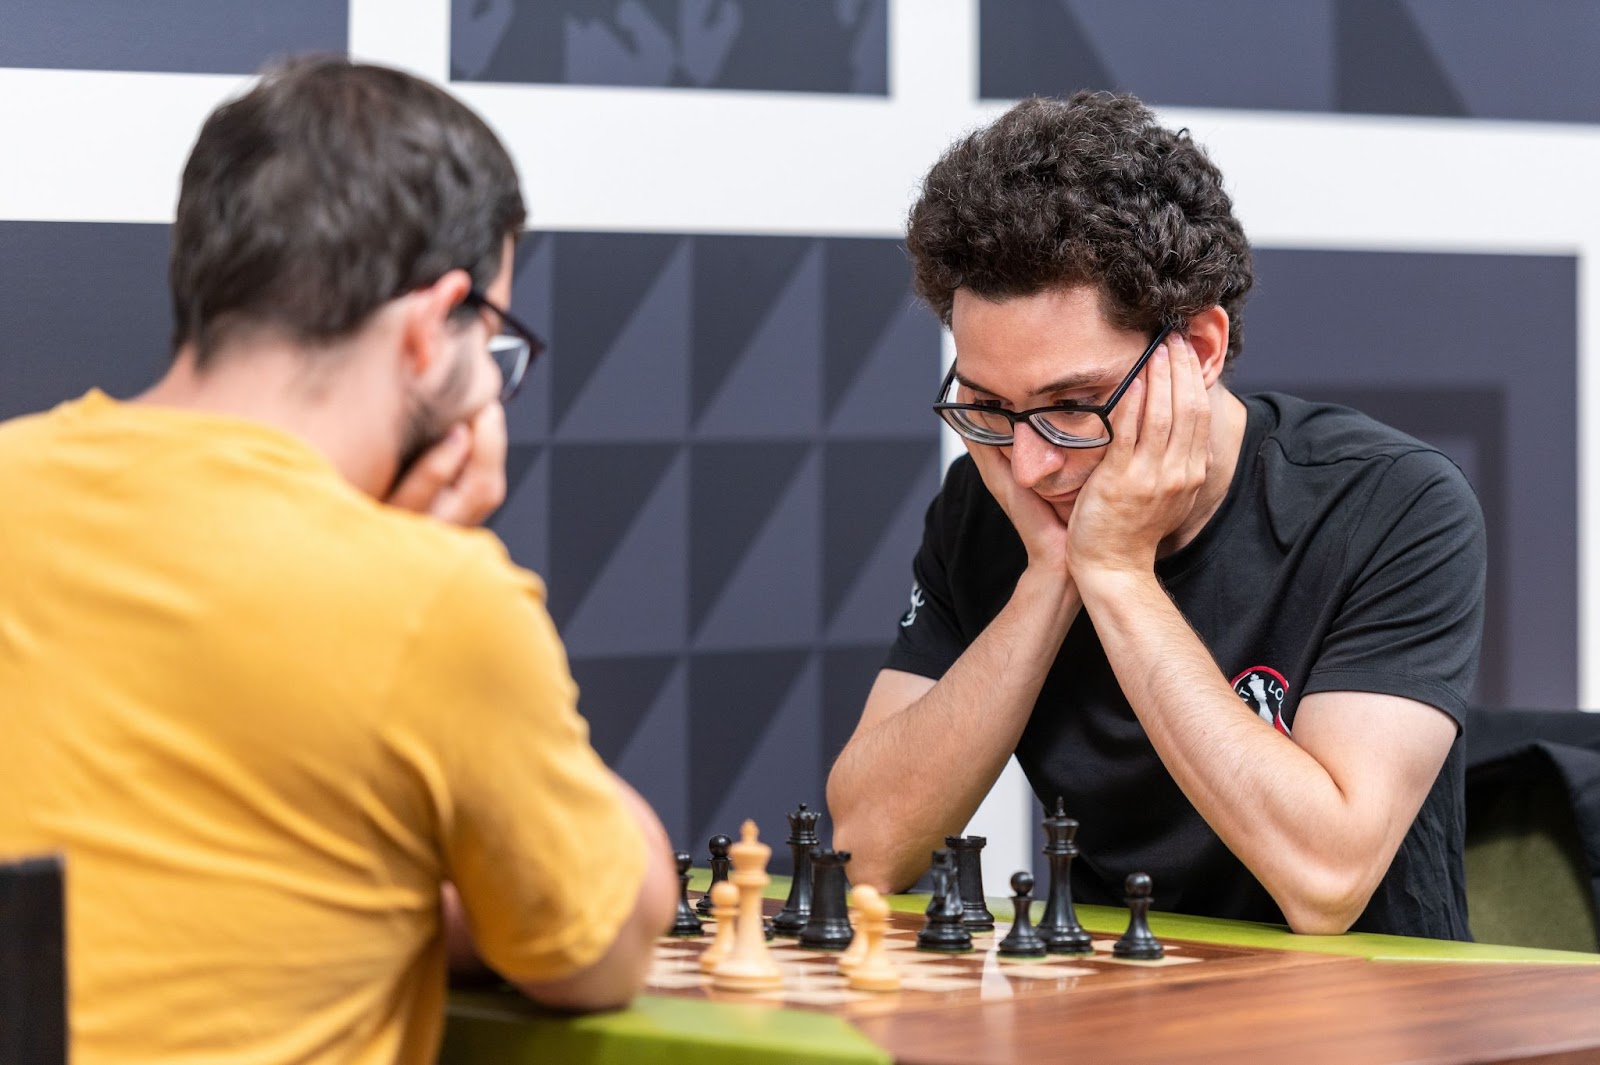 So Scores First Win, Caruana Joins Chase After Abdusattorov 